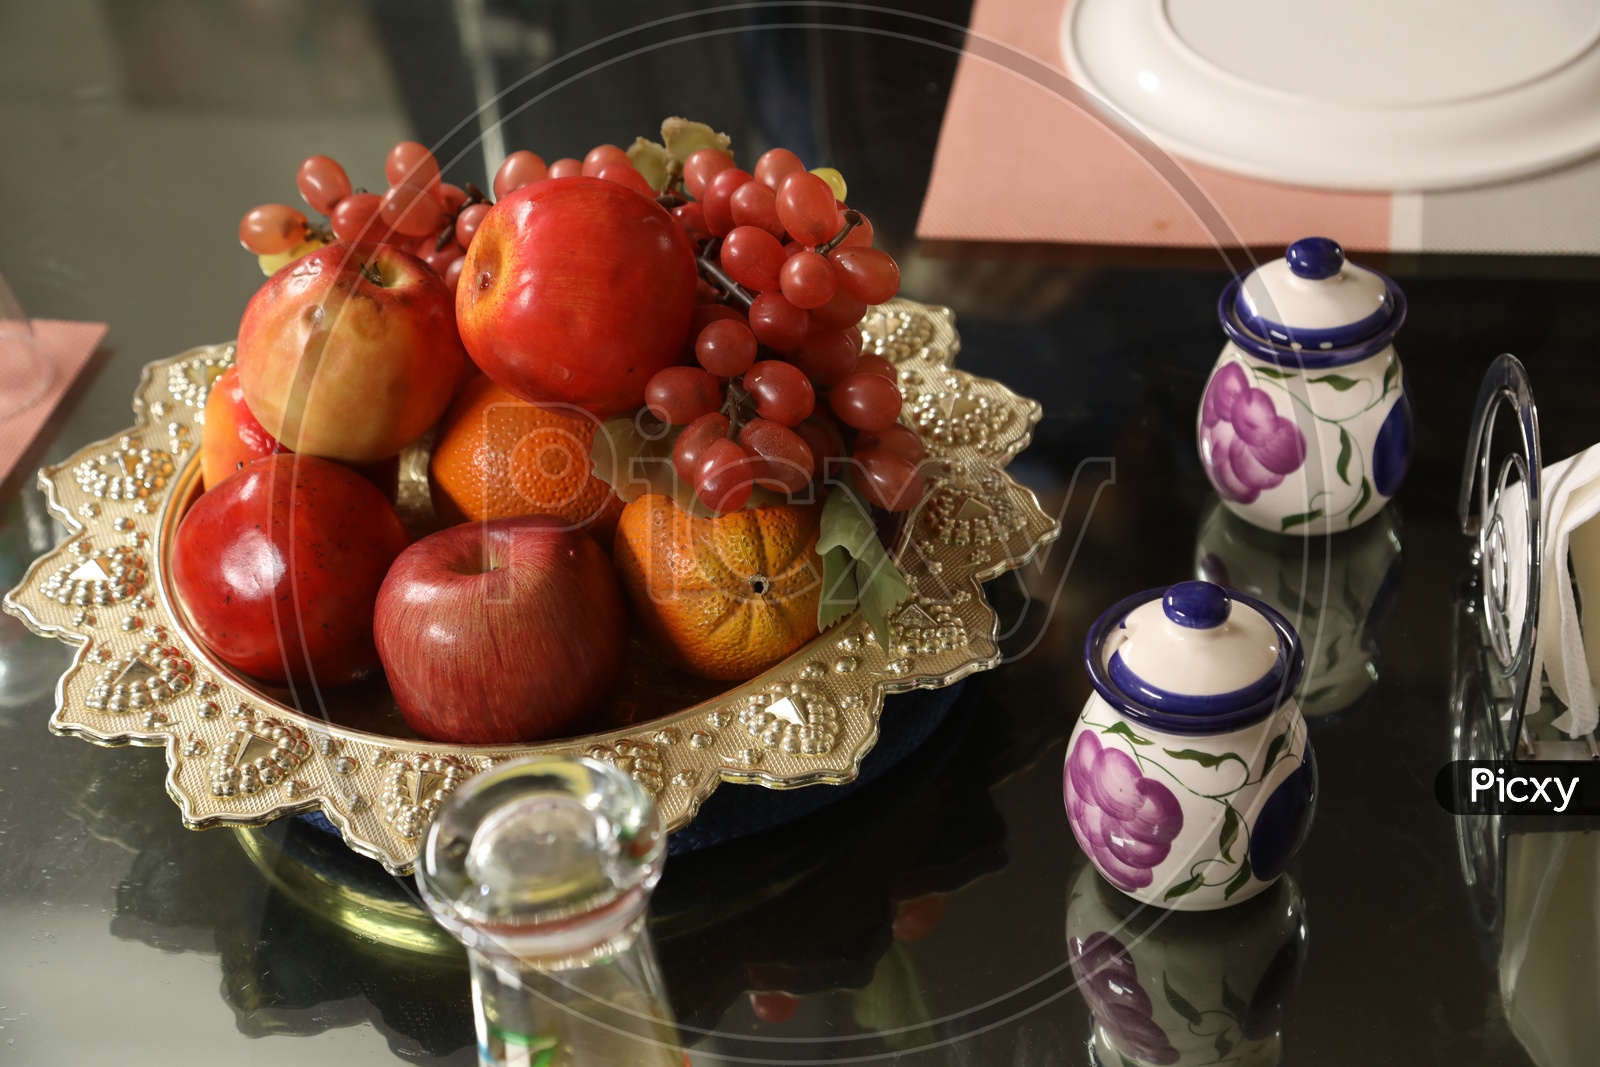 Artificial fruits and jars on dining table